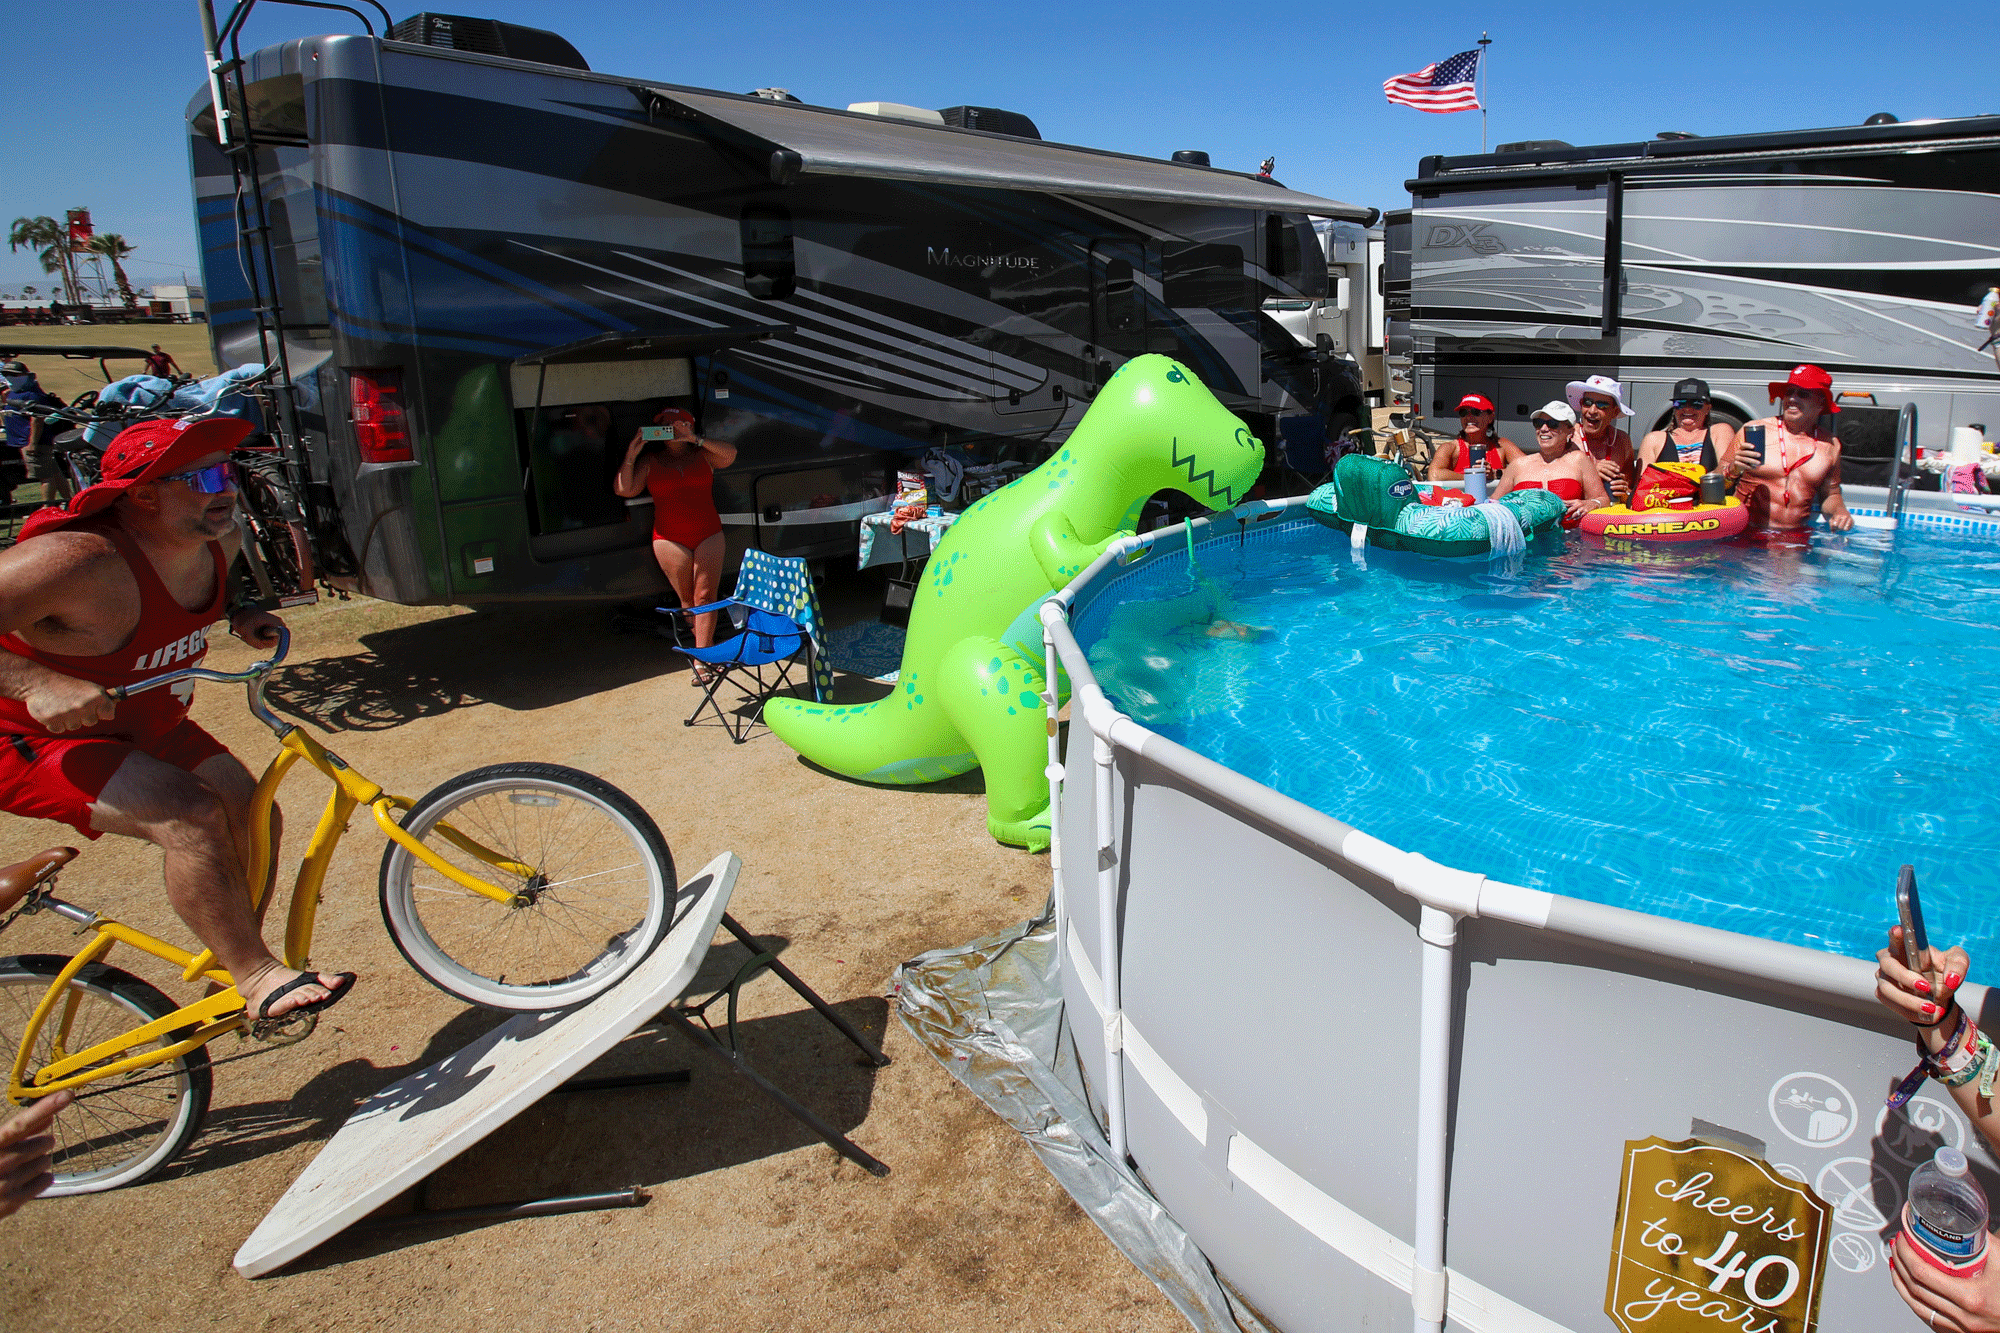 In an animated series of photos, a man rides a bike off an improvised table ramp into a pool at Stagecoach.